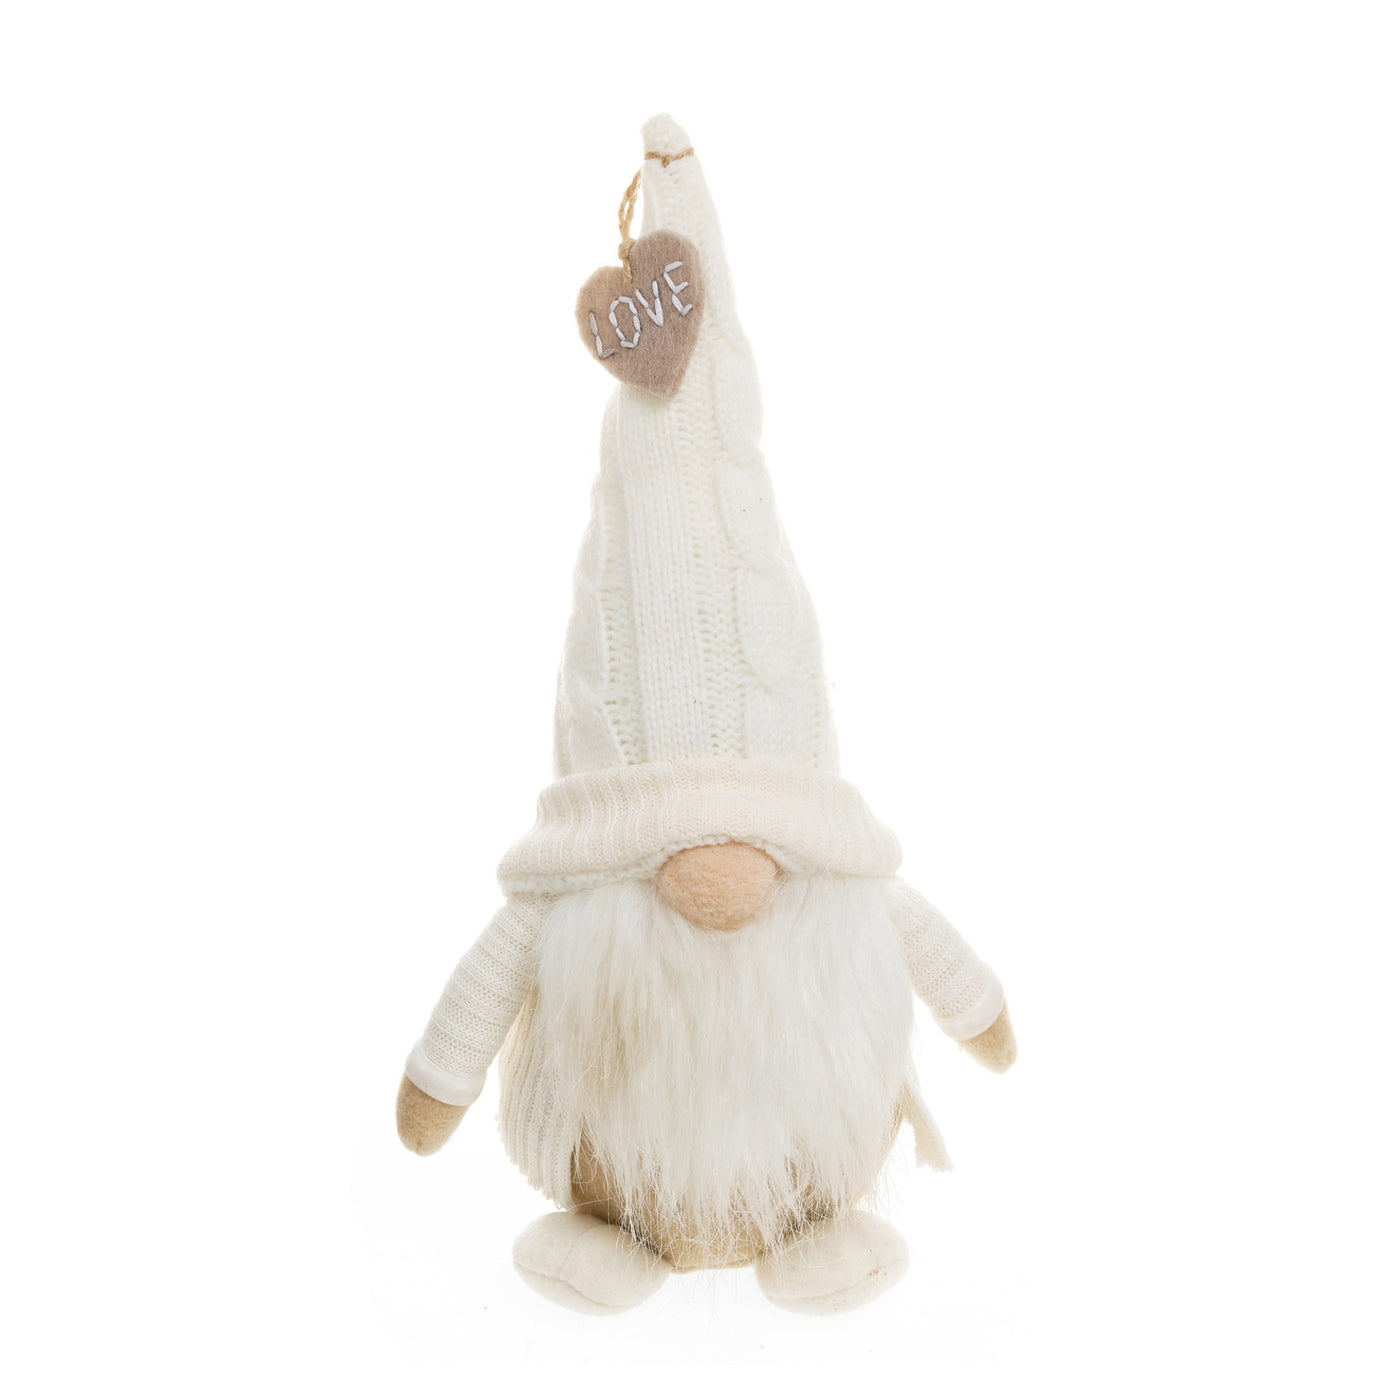 Gnome in Cable Knit Hat & Sweater: 10", Christmas decor